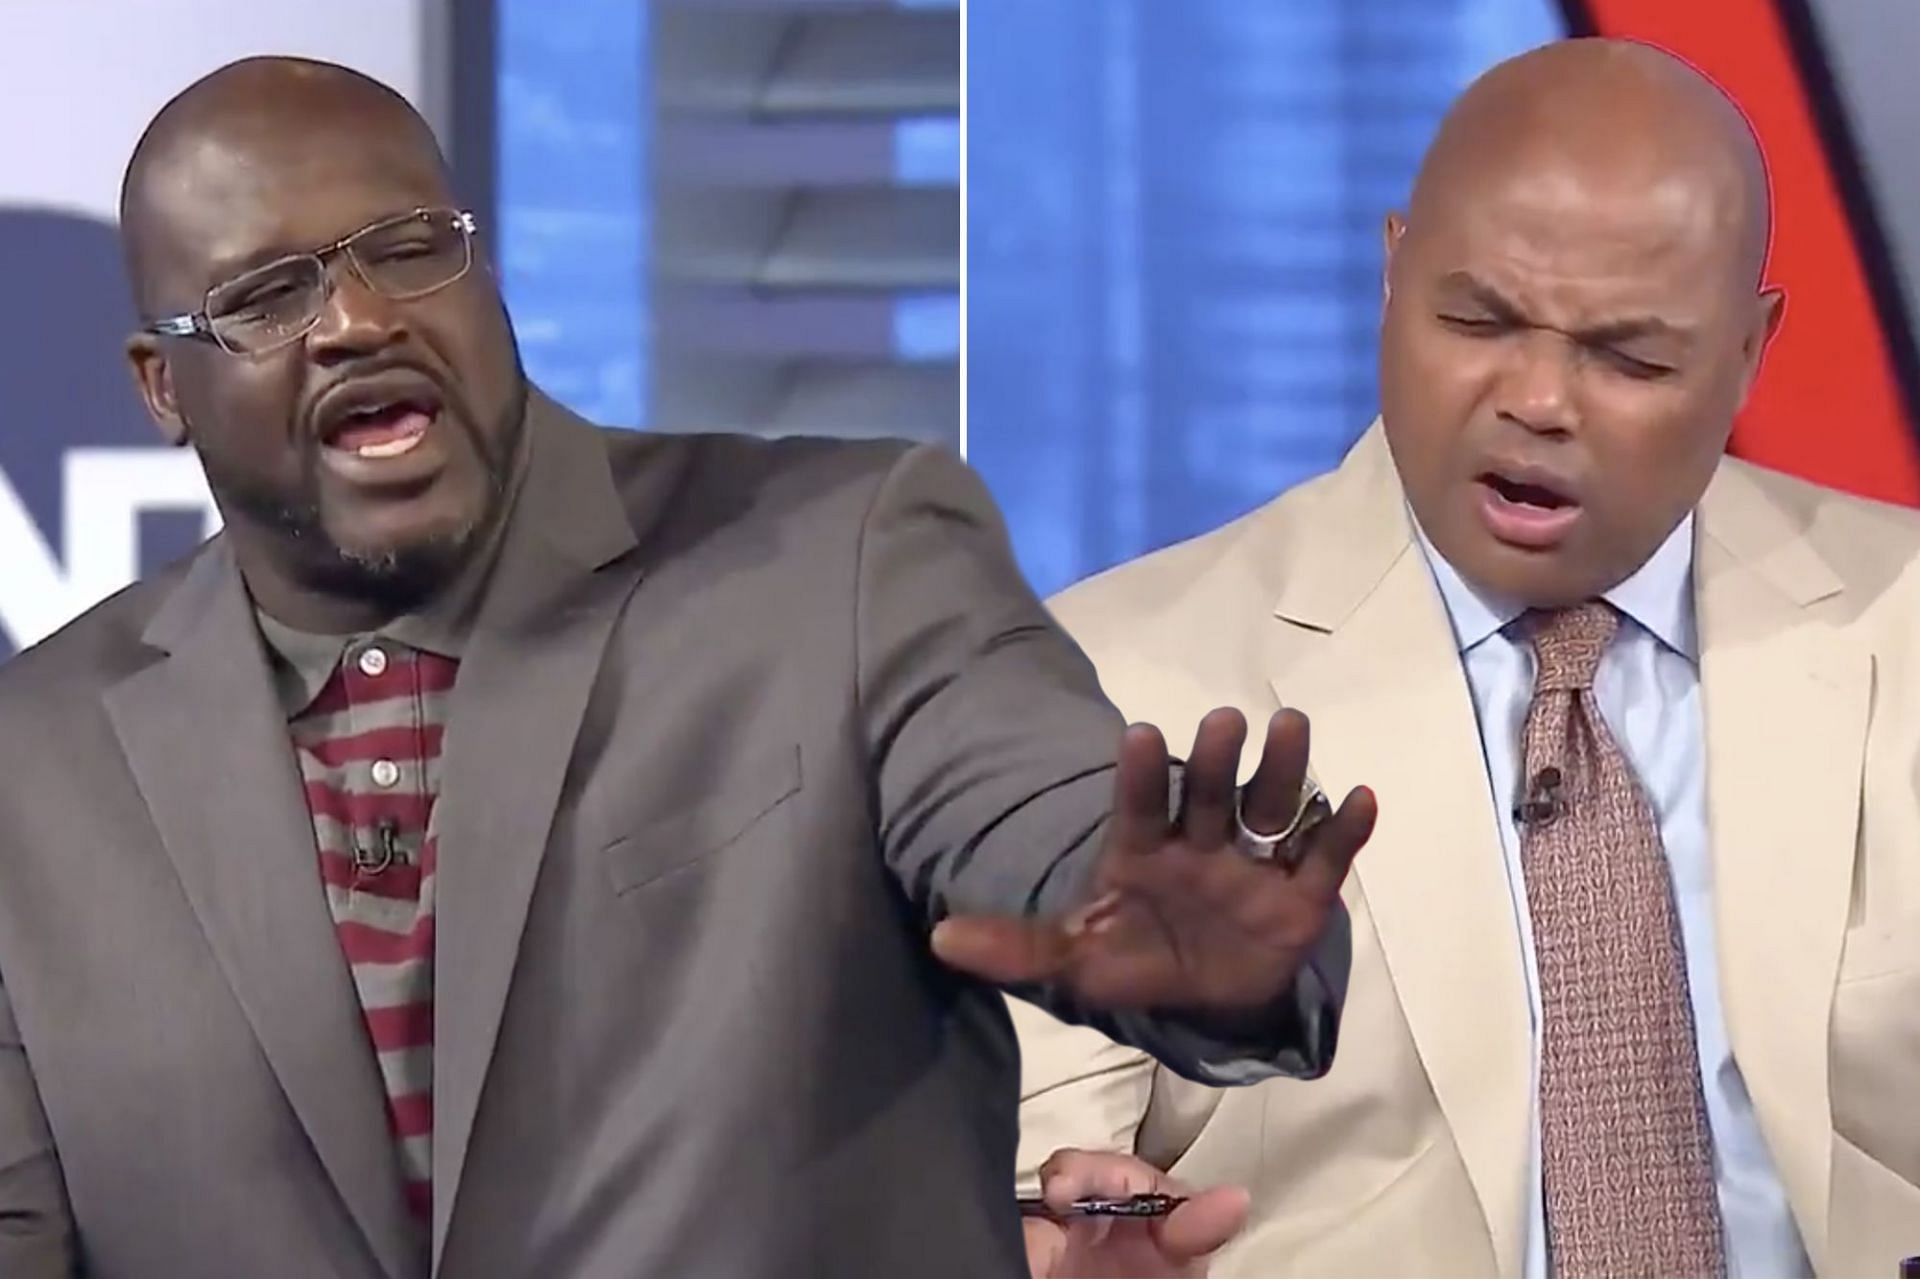 Charles Barkley hilariously tried to goad Shaq to say more about Rudy Gobert on the set of the NBA on TNT. [Photo: New York Post]